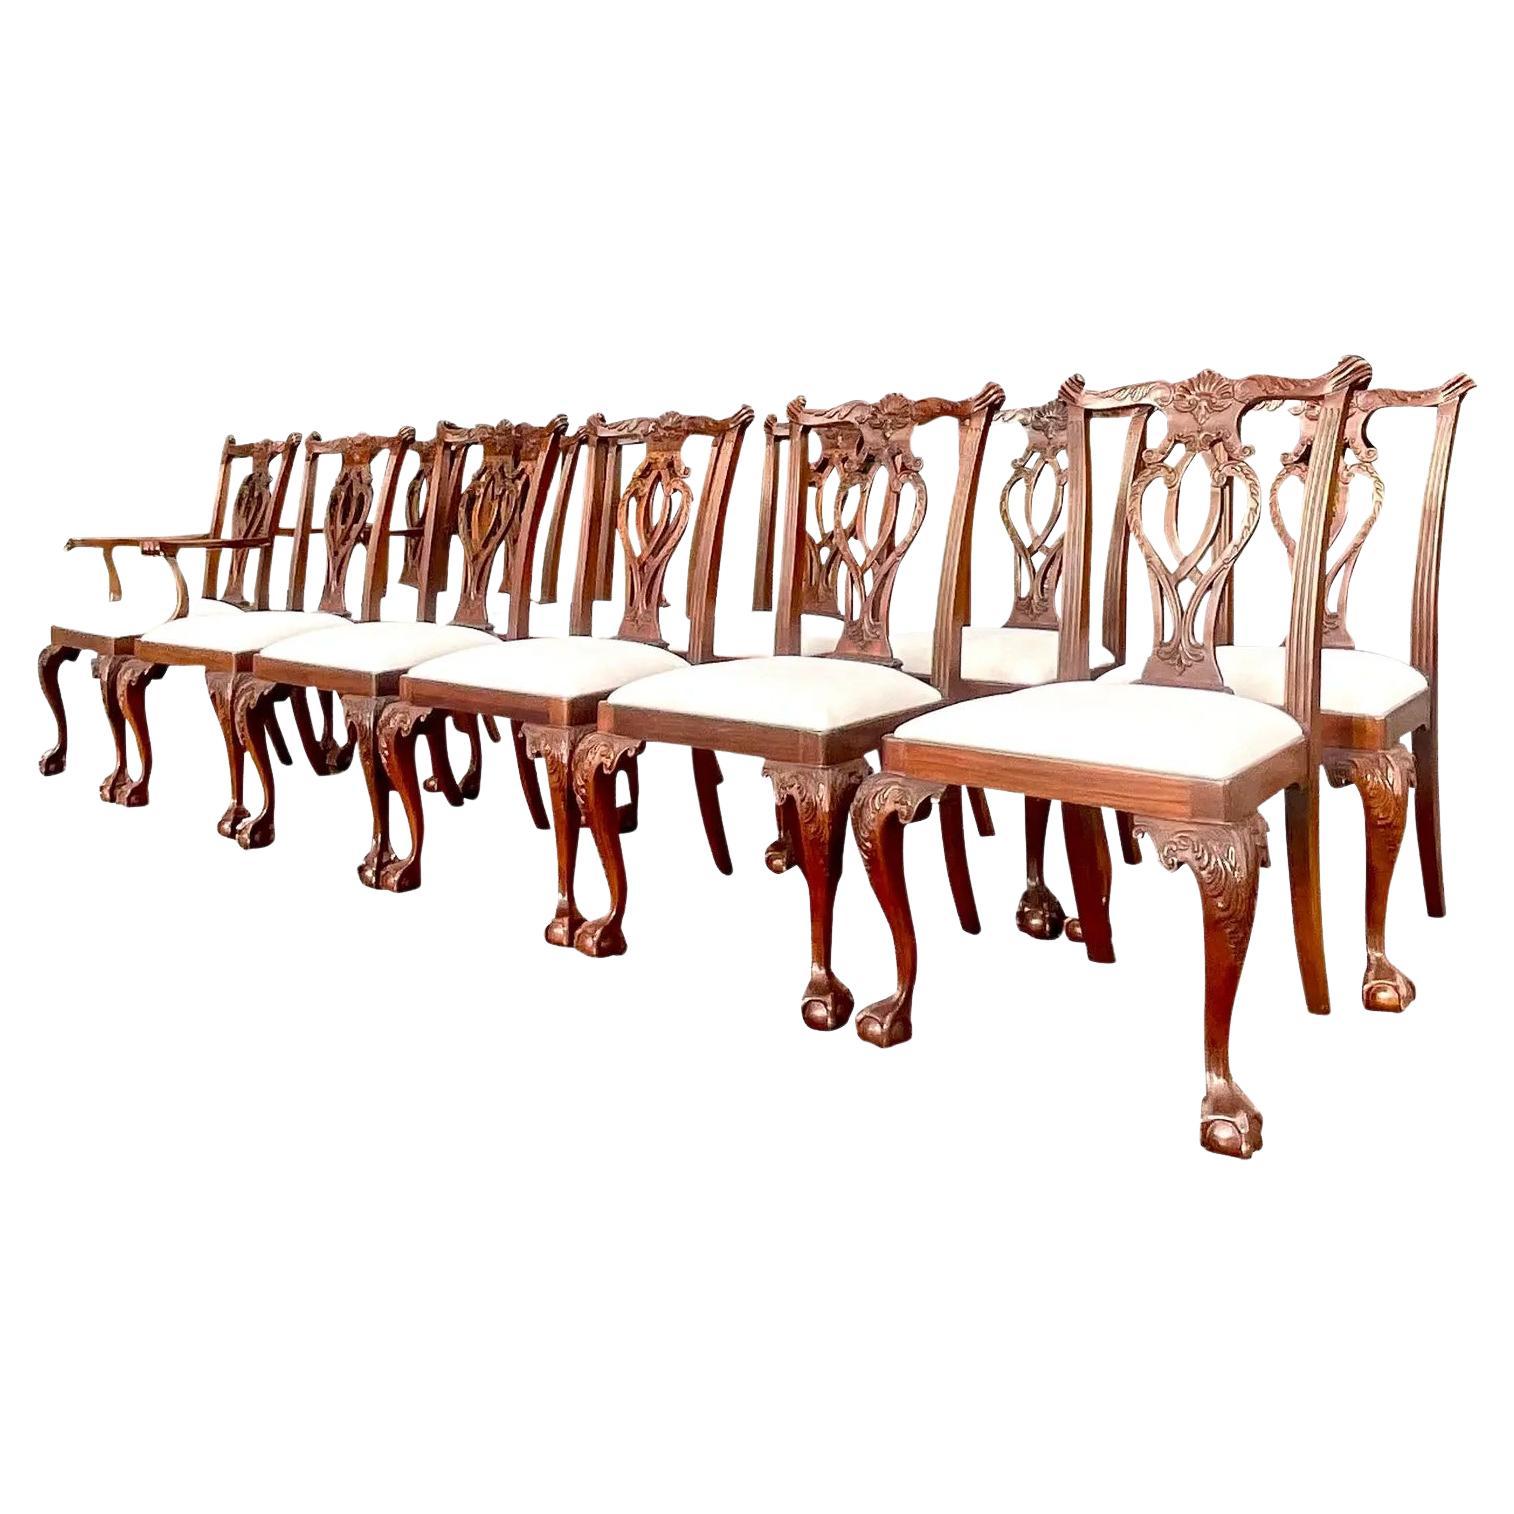 Vintage Regency Carved Mahogany Chippendale Dining Chairs, Set of 12